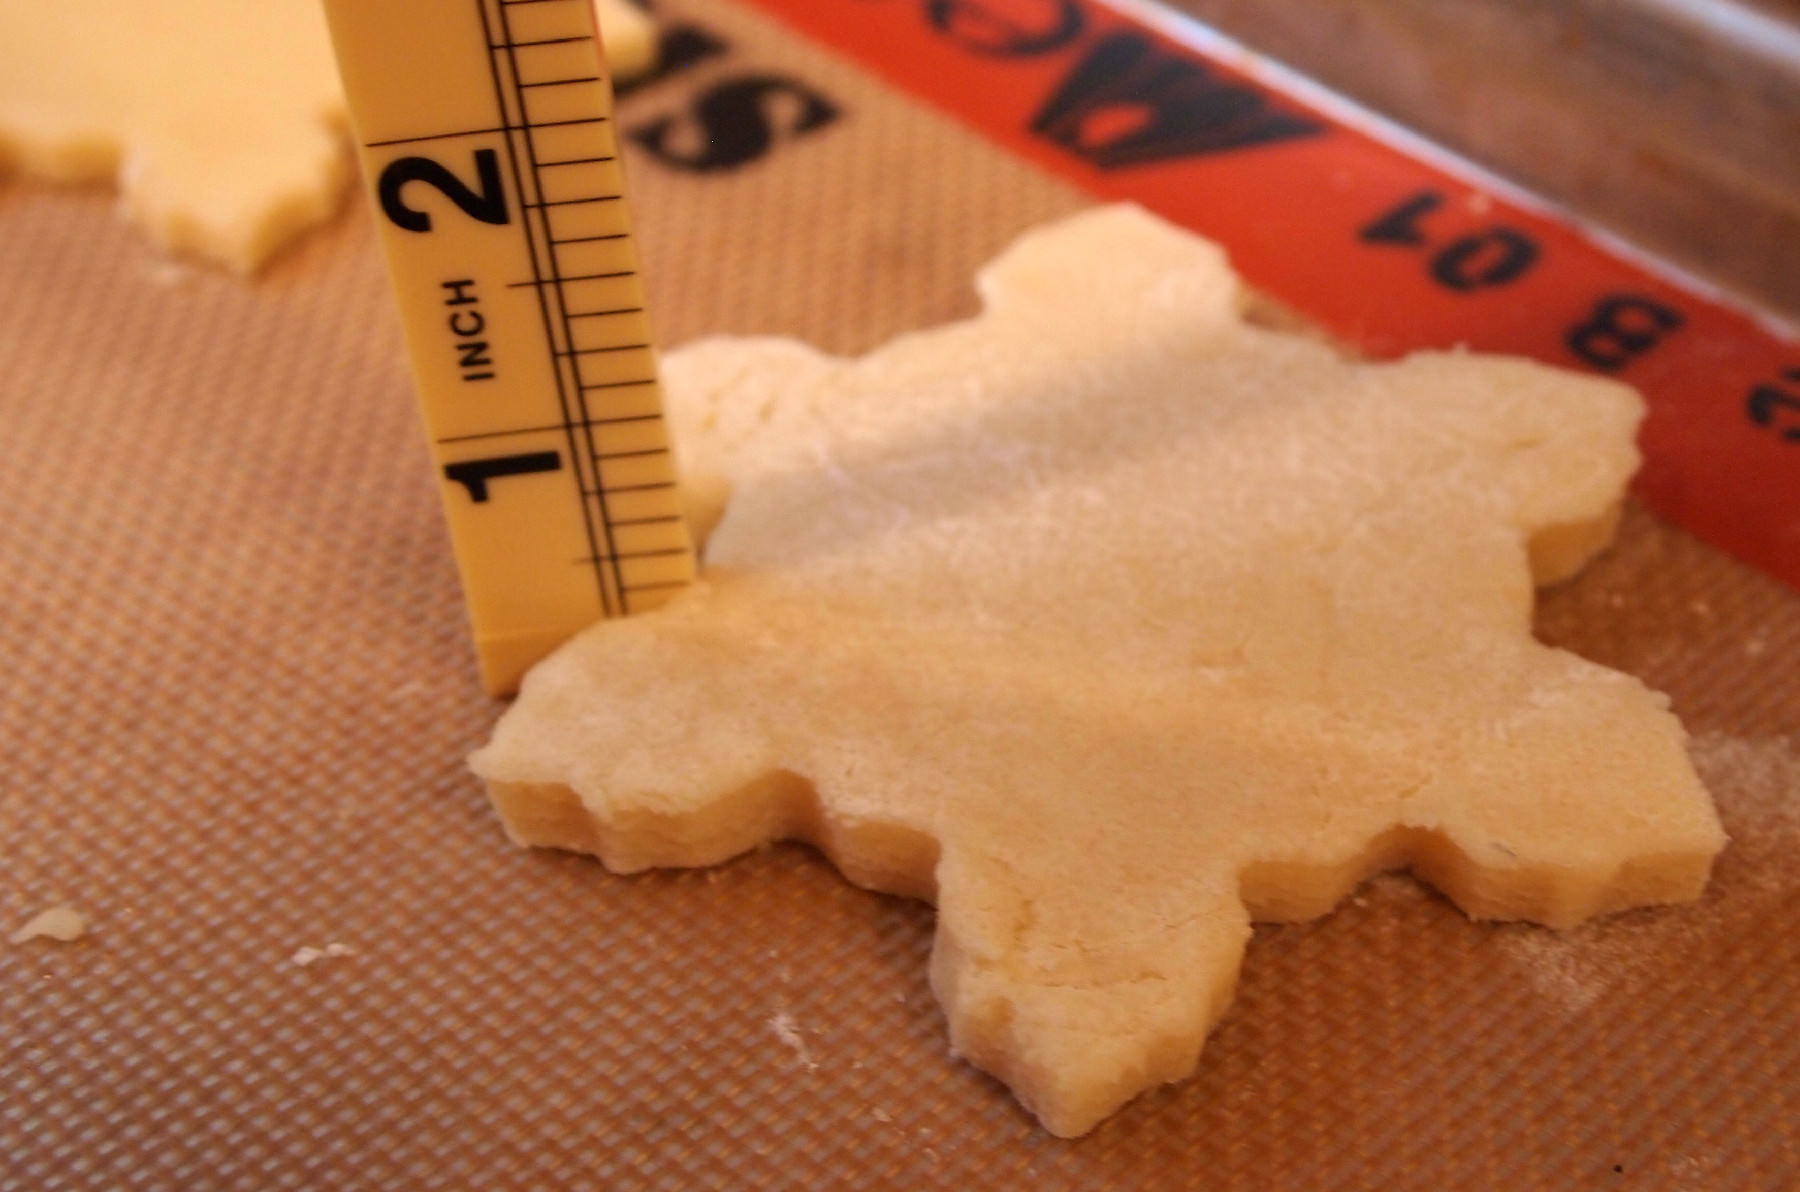 verify thickness of shortbread cookies is about 1/4 inch